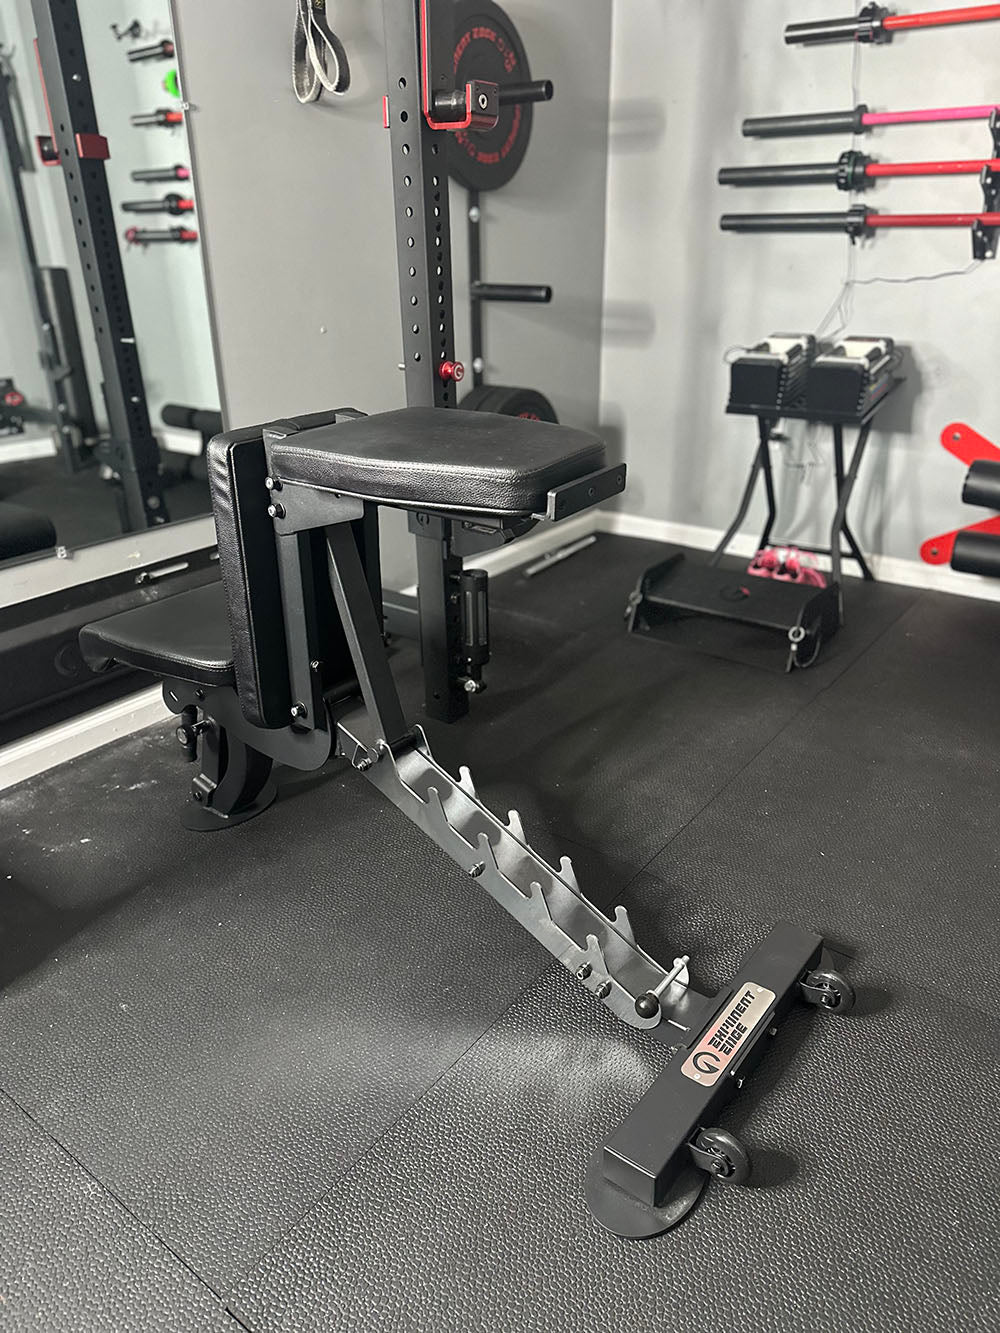 The Edge Infinity Bench is a bench that combines three separate benches all into one bench. You get the benefits of a flat bench, incline bench, and half bench all in one device. This image presents the bench from a behind view.